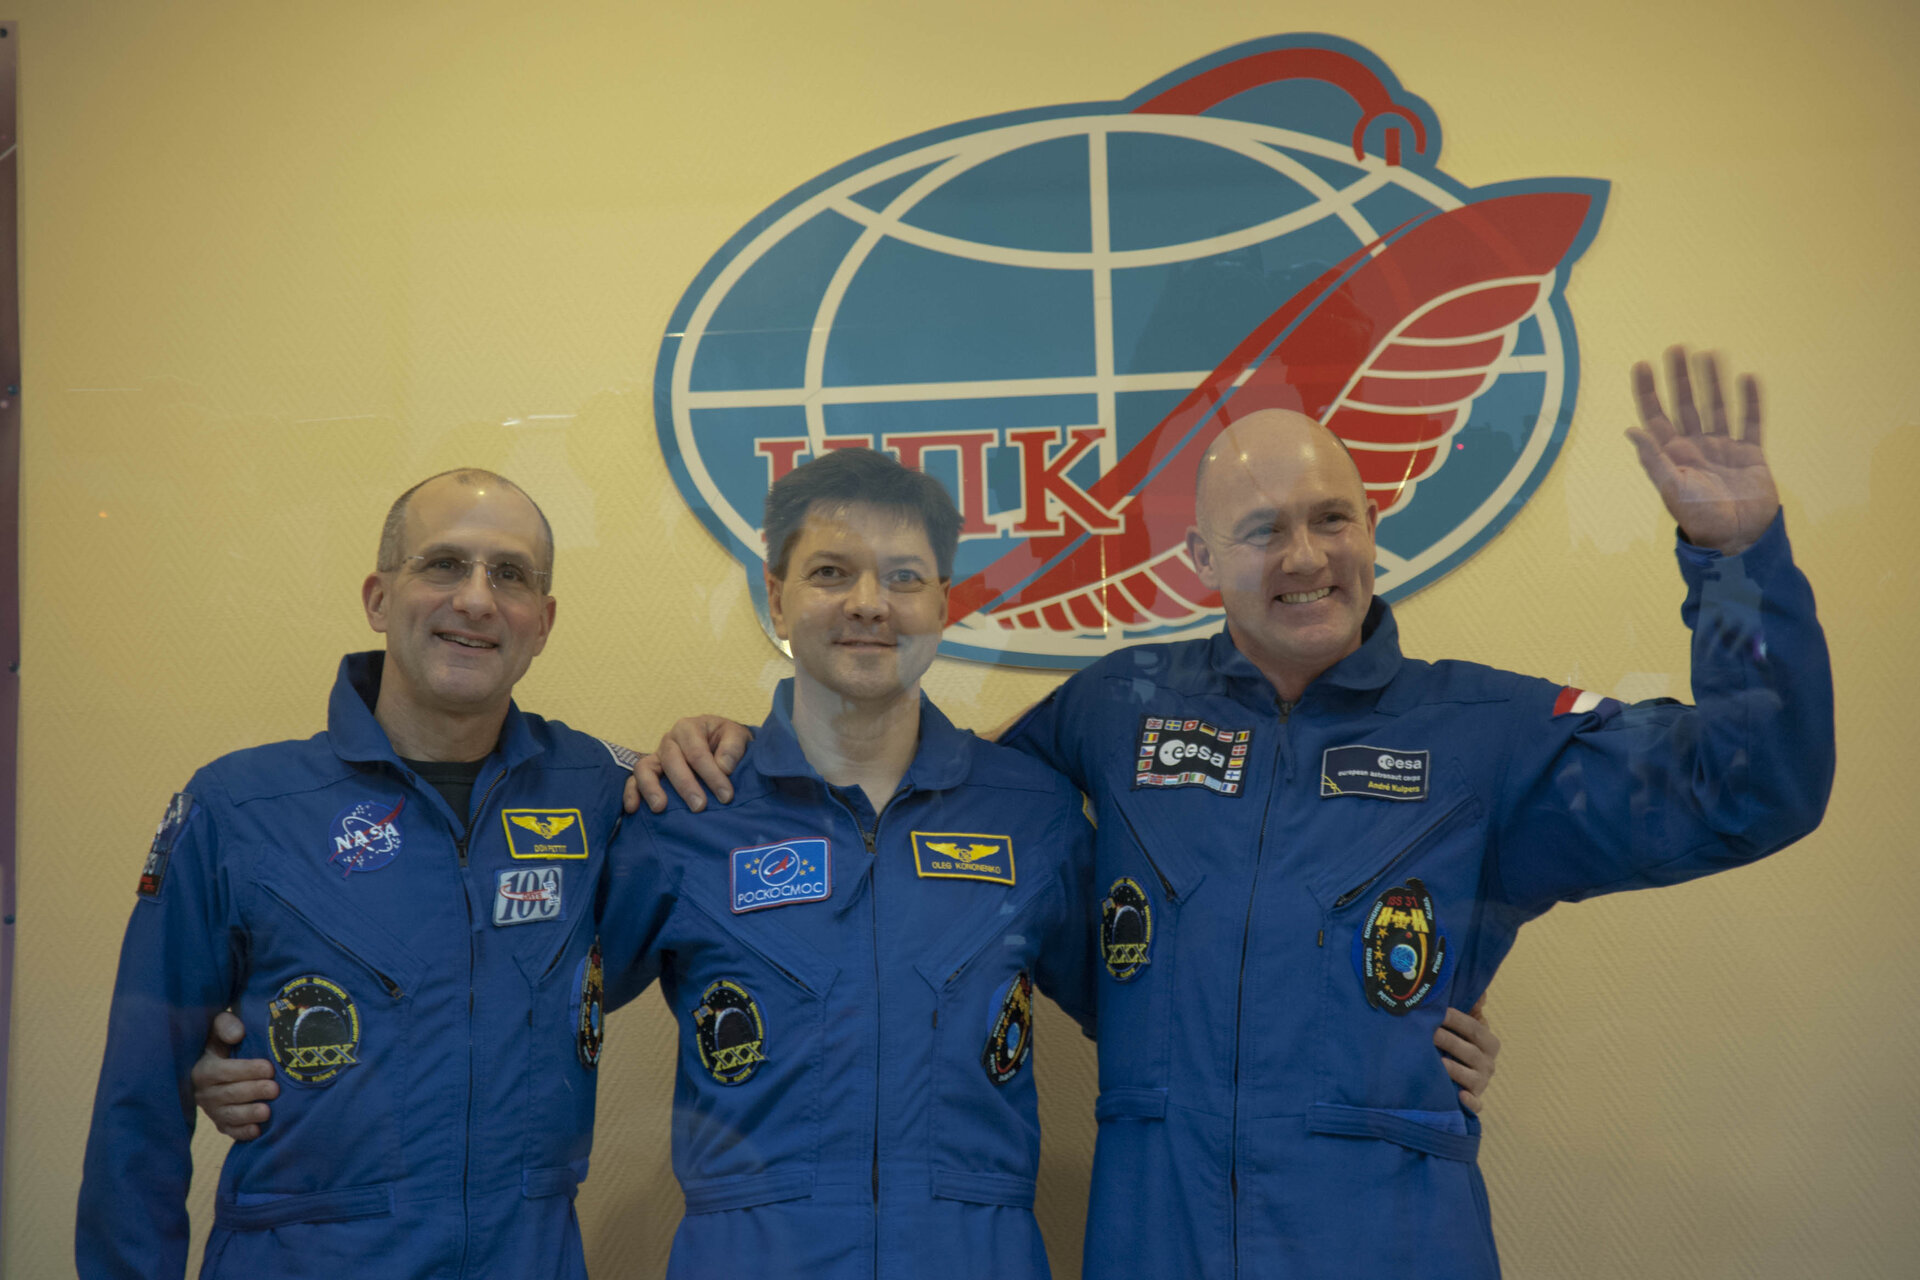 Expedition 30/31 crew members during the Press Conference